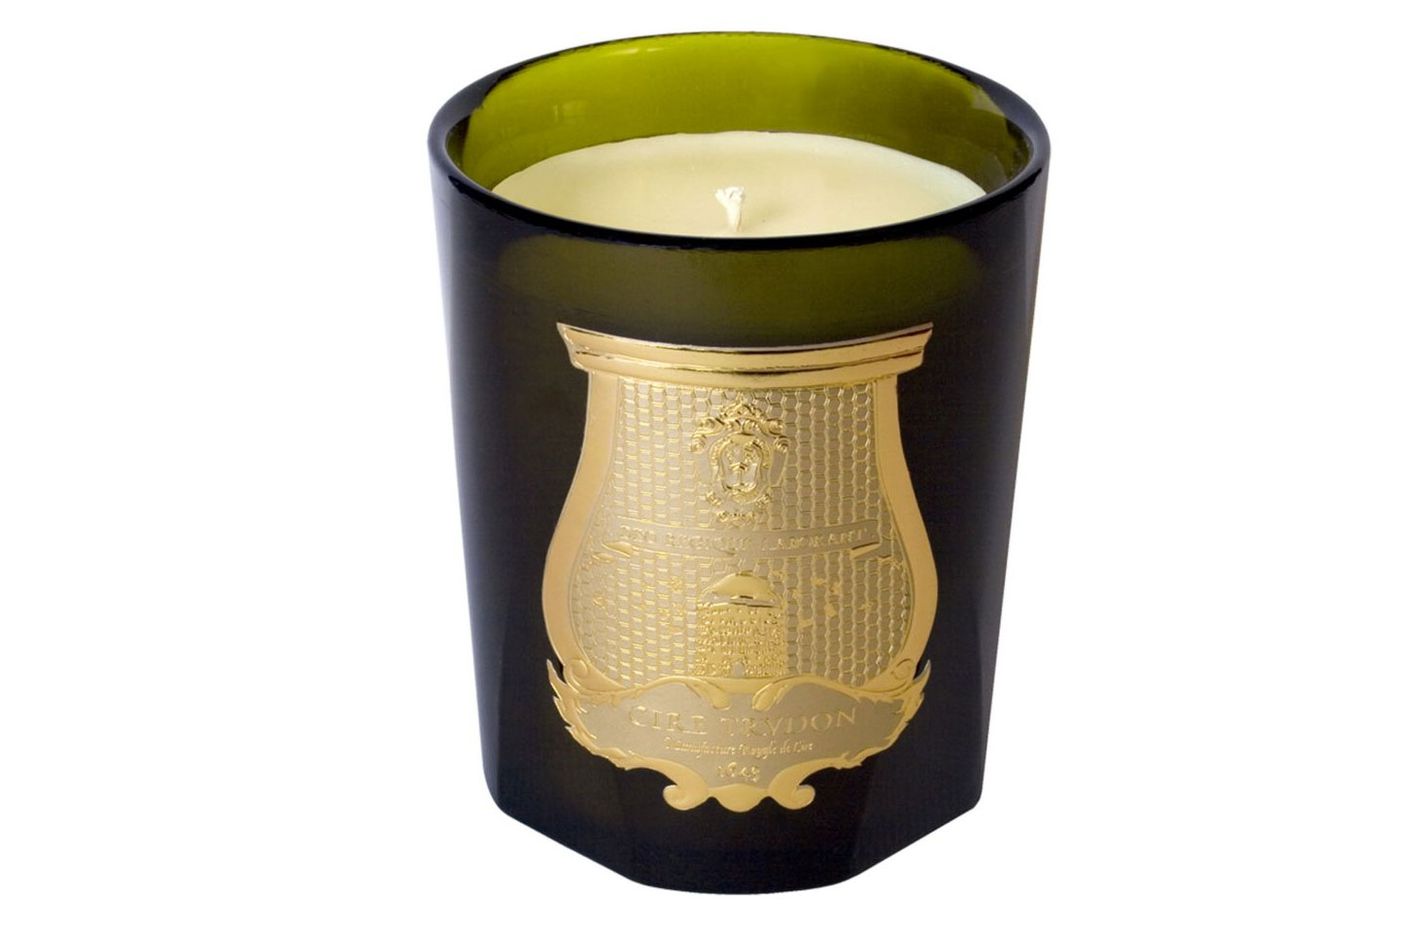 The Best Candles for Every Room